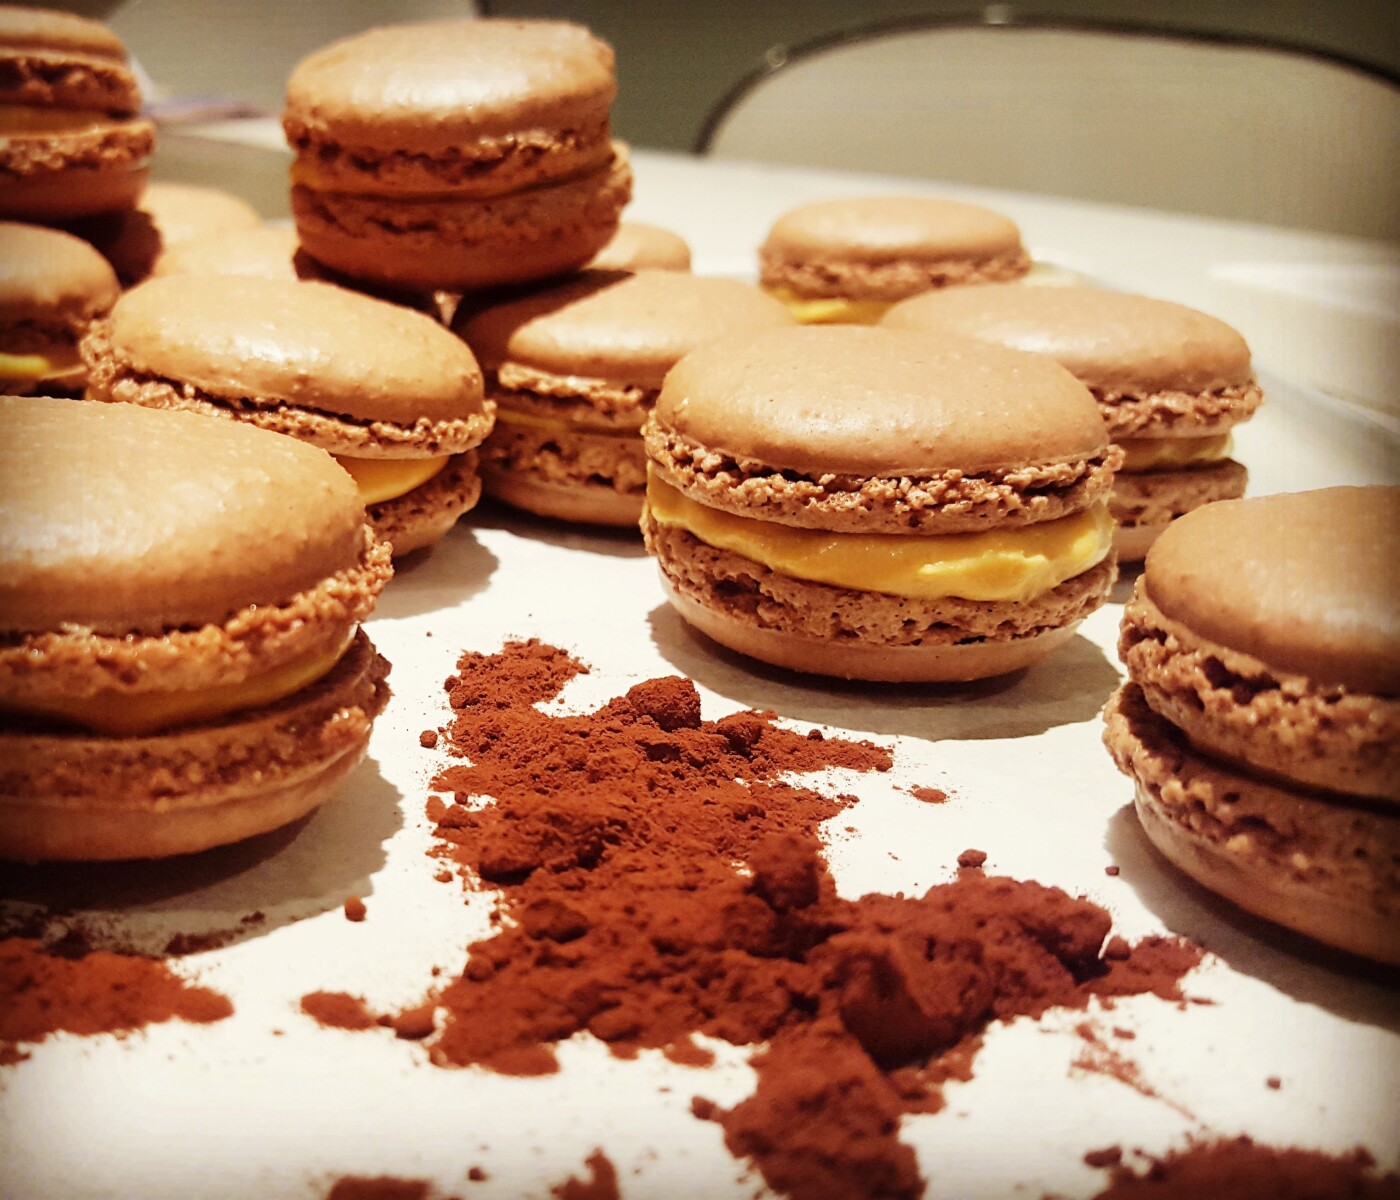 My chocolate and caramel filled macarons were created for my husband. I was making my rasberry Macarons one day when my husband Michael said to me you know what would really be nice,  chocolate and caramel...so i decided to make them for him. So instead of using rasberry puree I changed it up and used cocoa powder in it's place. The caramel I made from scratch. They were a huge hit with my hubby and his work mates. These are his favorite!!